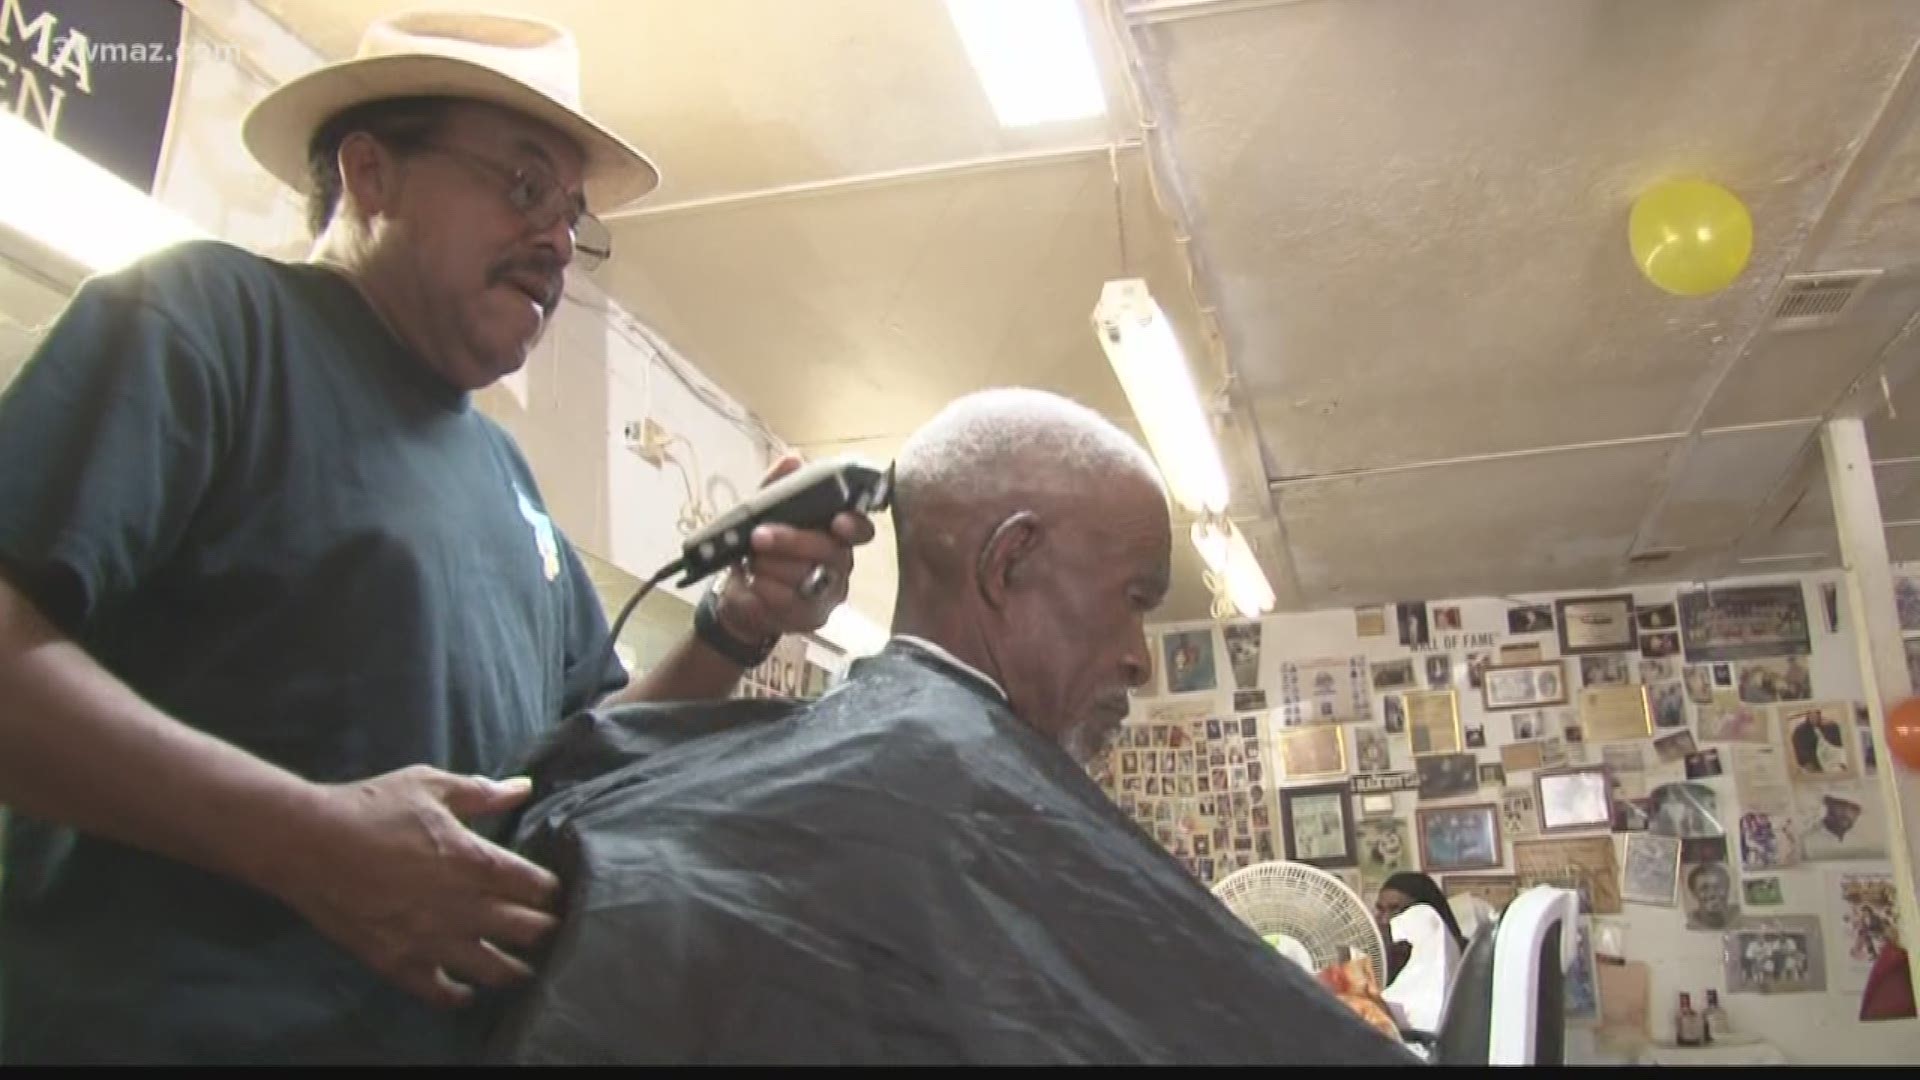 A Central Georgia business owner is celebrating 40 years of serving customers in the same location on Market Street in Warner Robins. Jacko Davis has been cutting hair for Jacko's Hair Force since it opened back on August 21, 1979. His clientele include former NFL players Eddie Anderson and Kevin Porter, and a young Chris Porter, a former 13WMAZ sports personality.